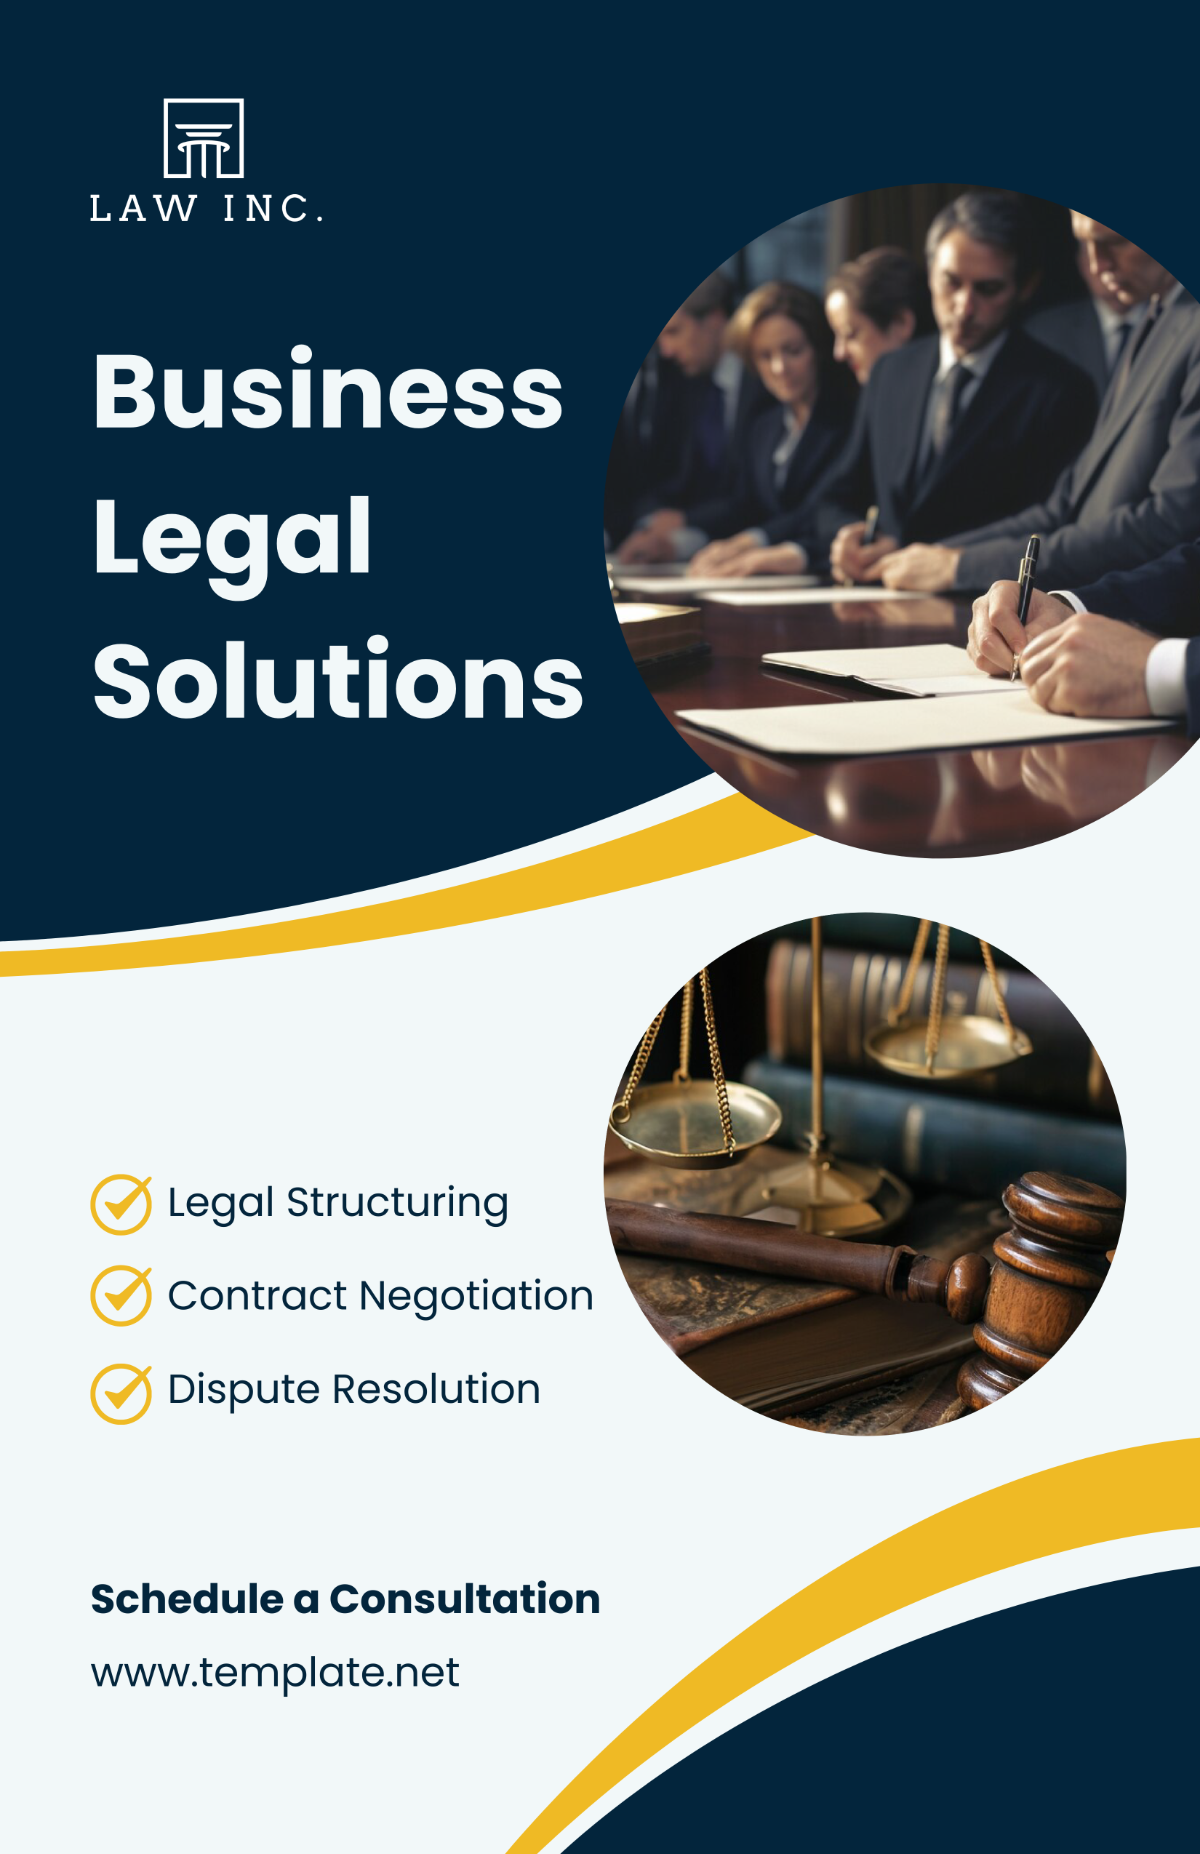 Law Firm Service Poster Template